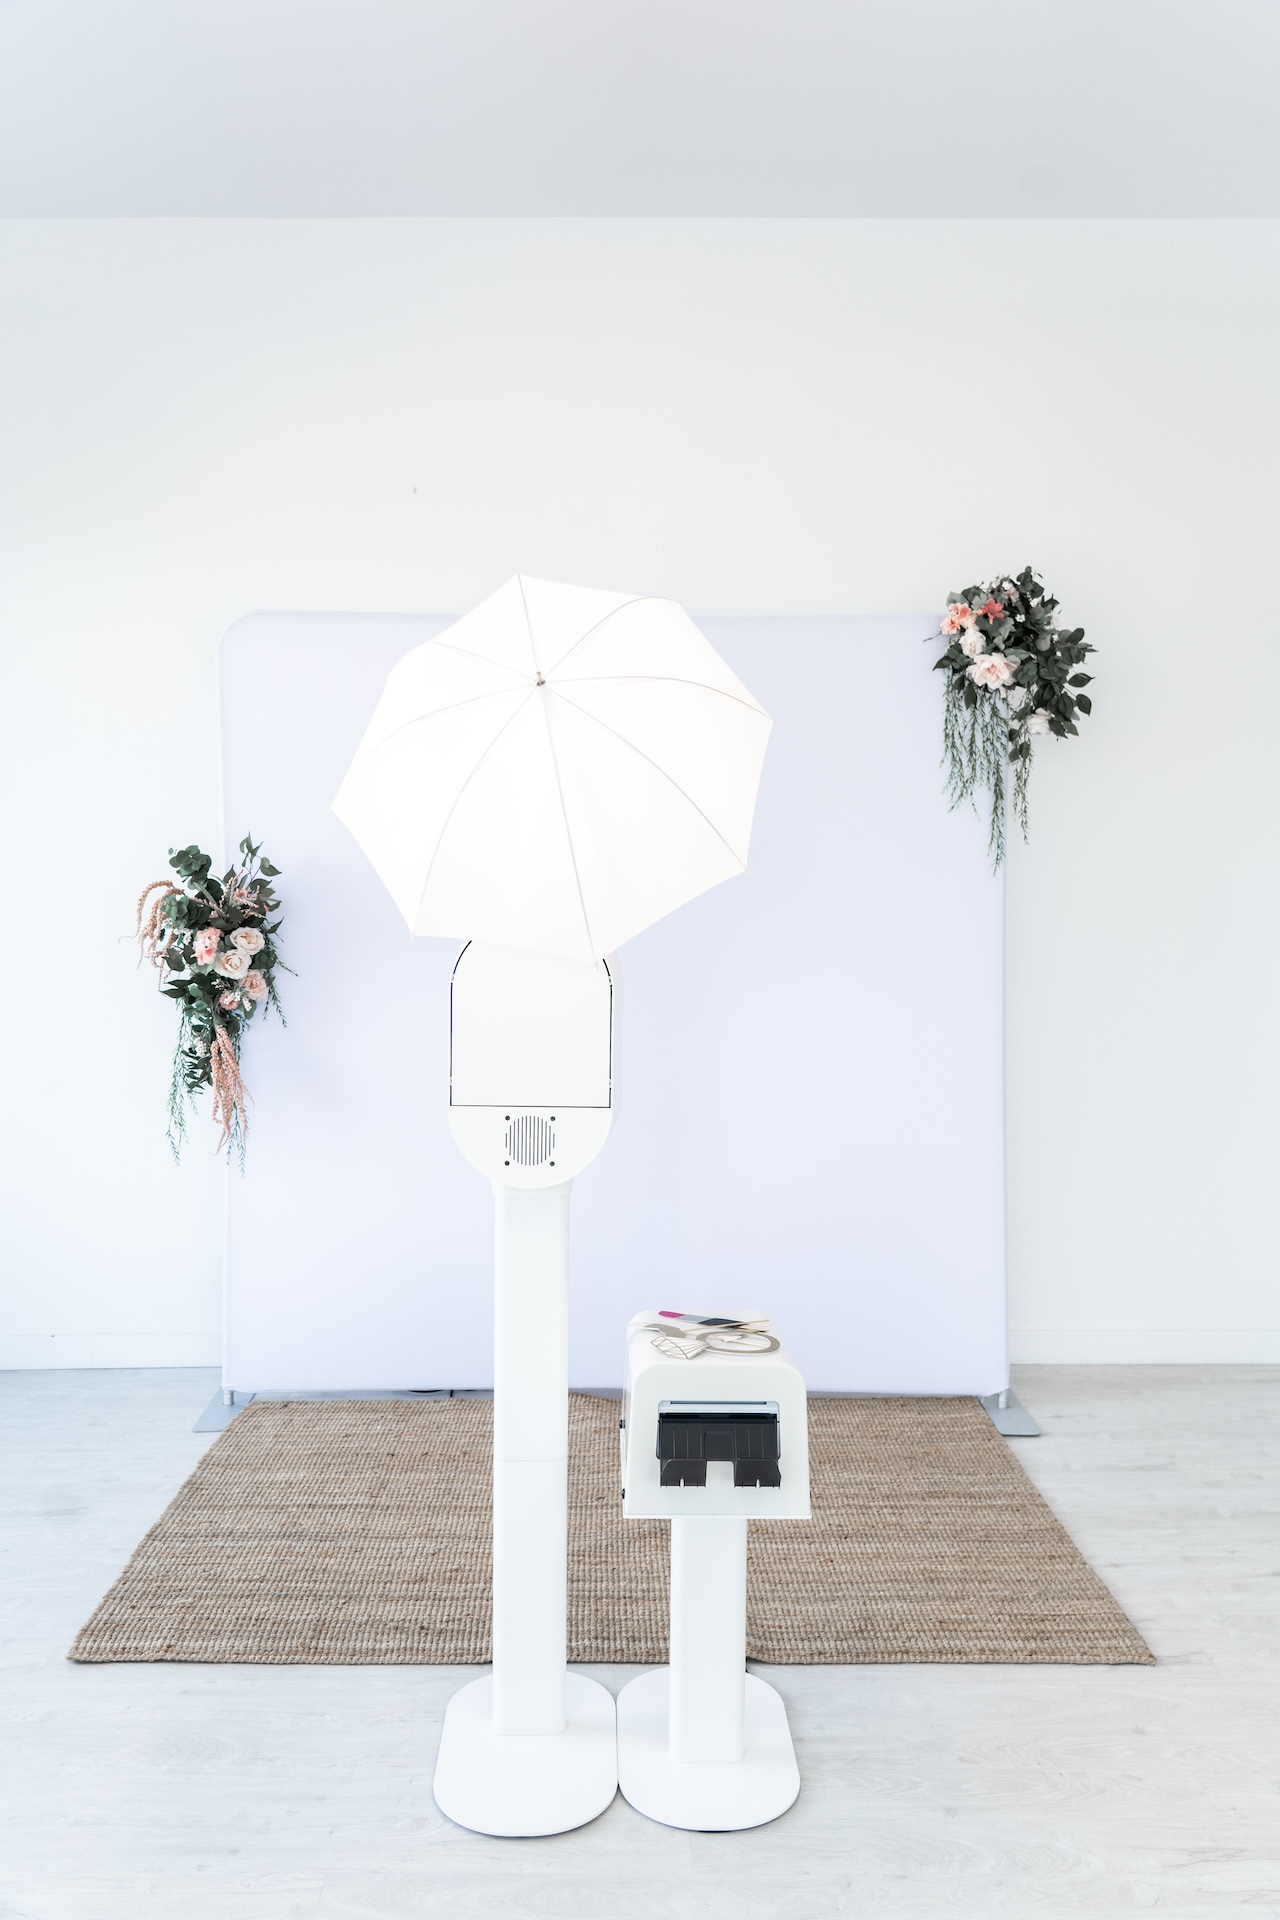 Shutterhead Studios photo booth with printer and white backdrop with flowers